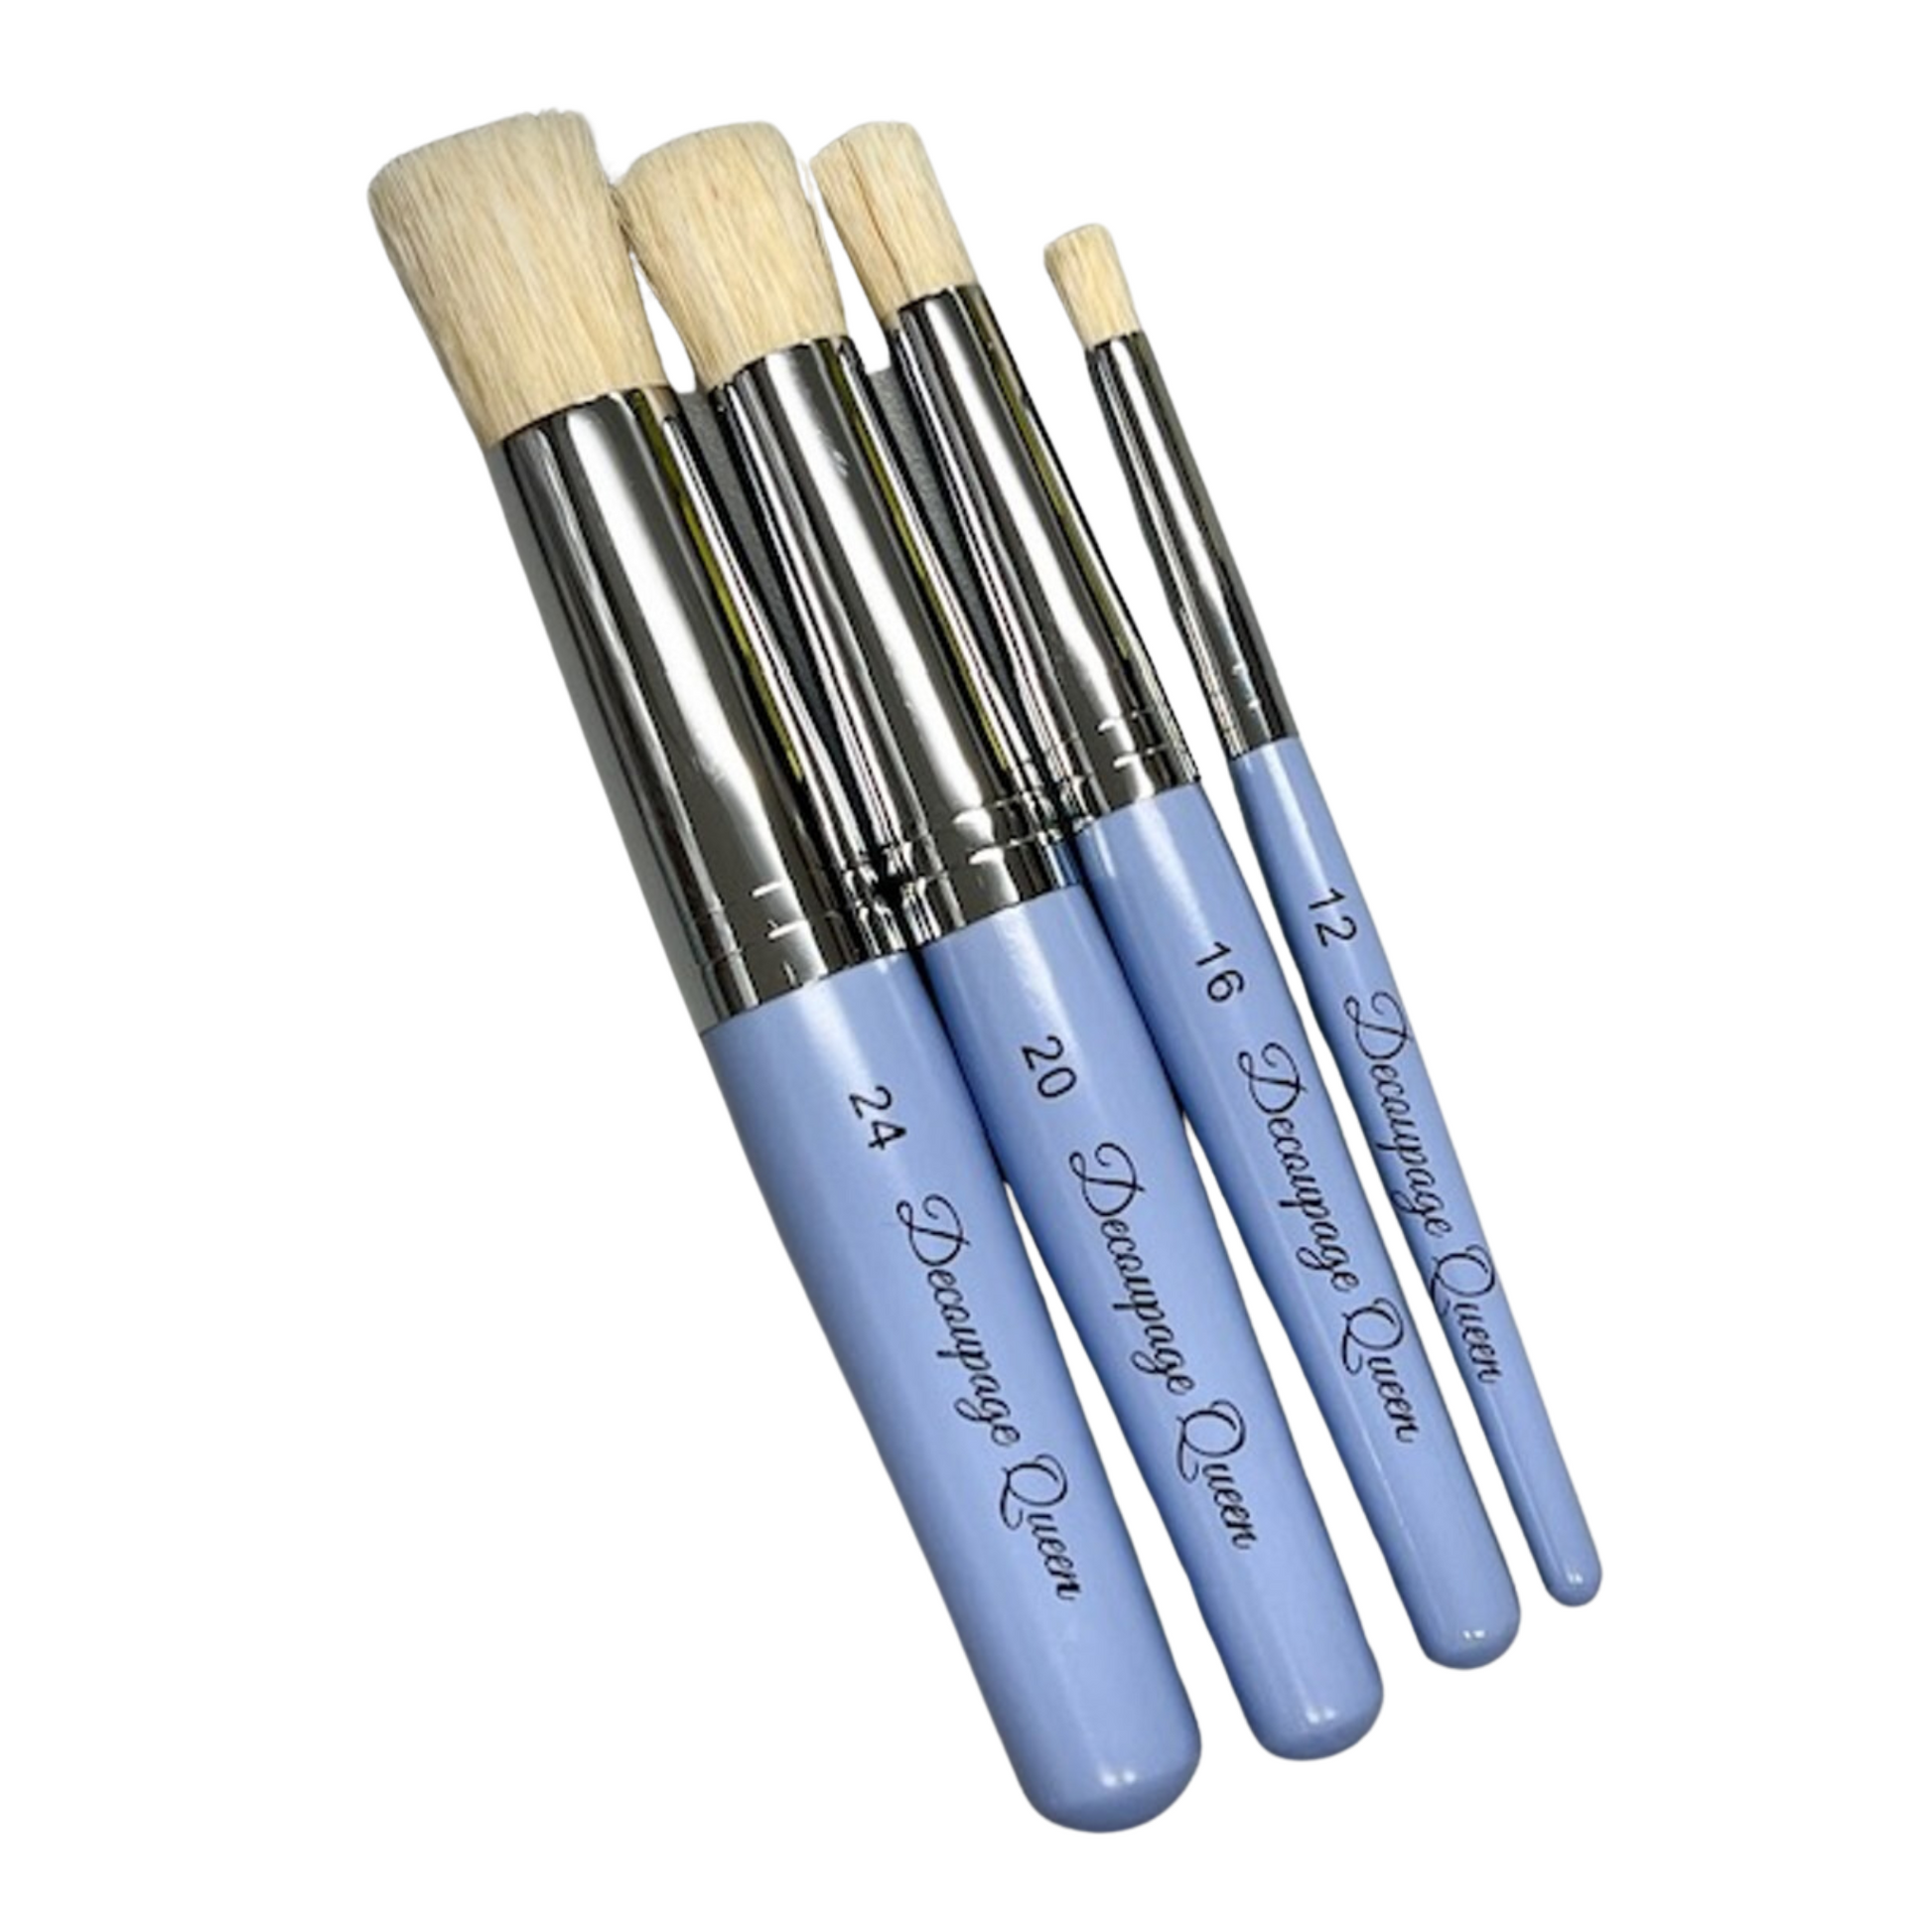 Stencil Brush Kit by Decoupage Queen. Set of 4 stencil brushes in size  12, 16, 20 and 24. Available at Milton's Daughter.